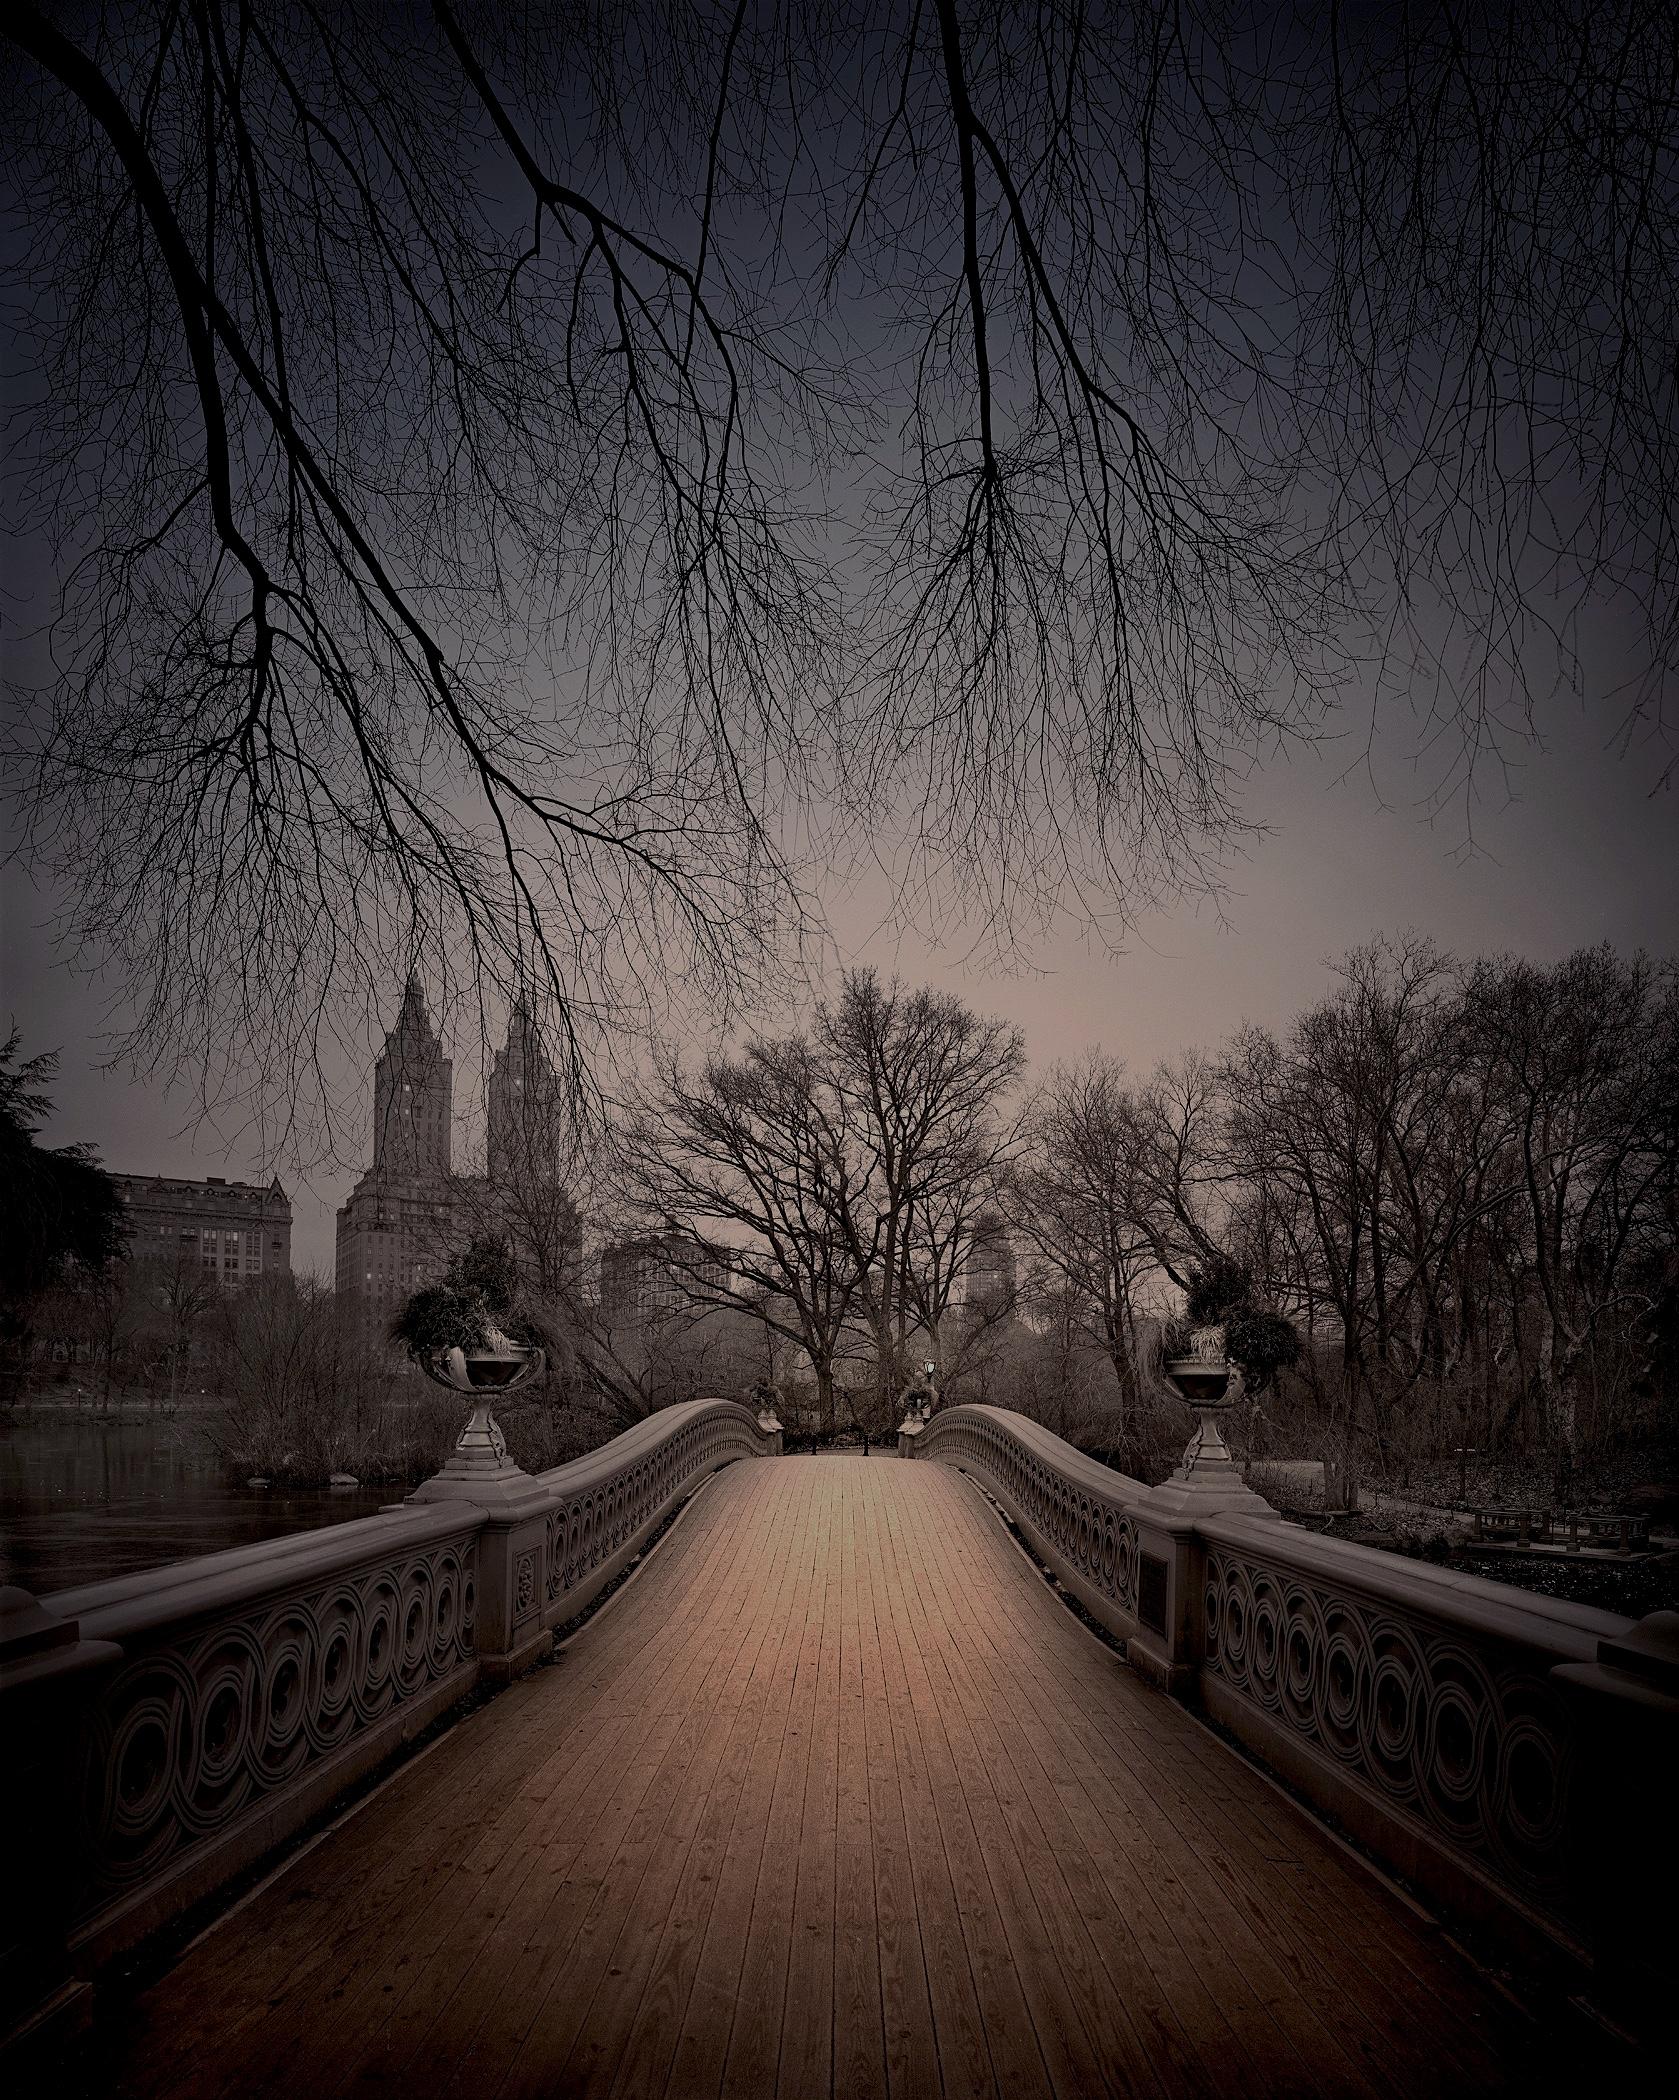 Michael Massaia - Bow Bridge-Looking North, Photography 2019, Printed After